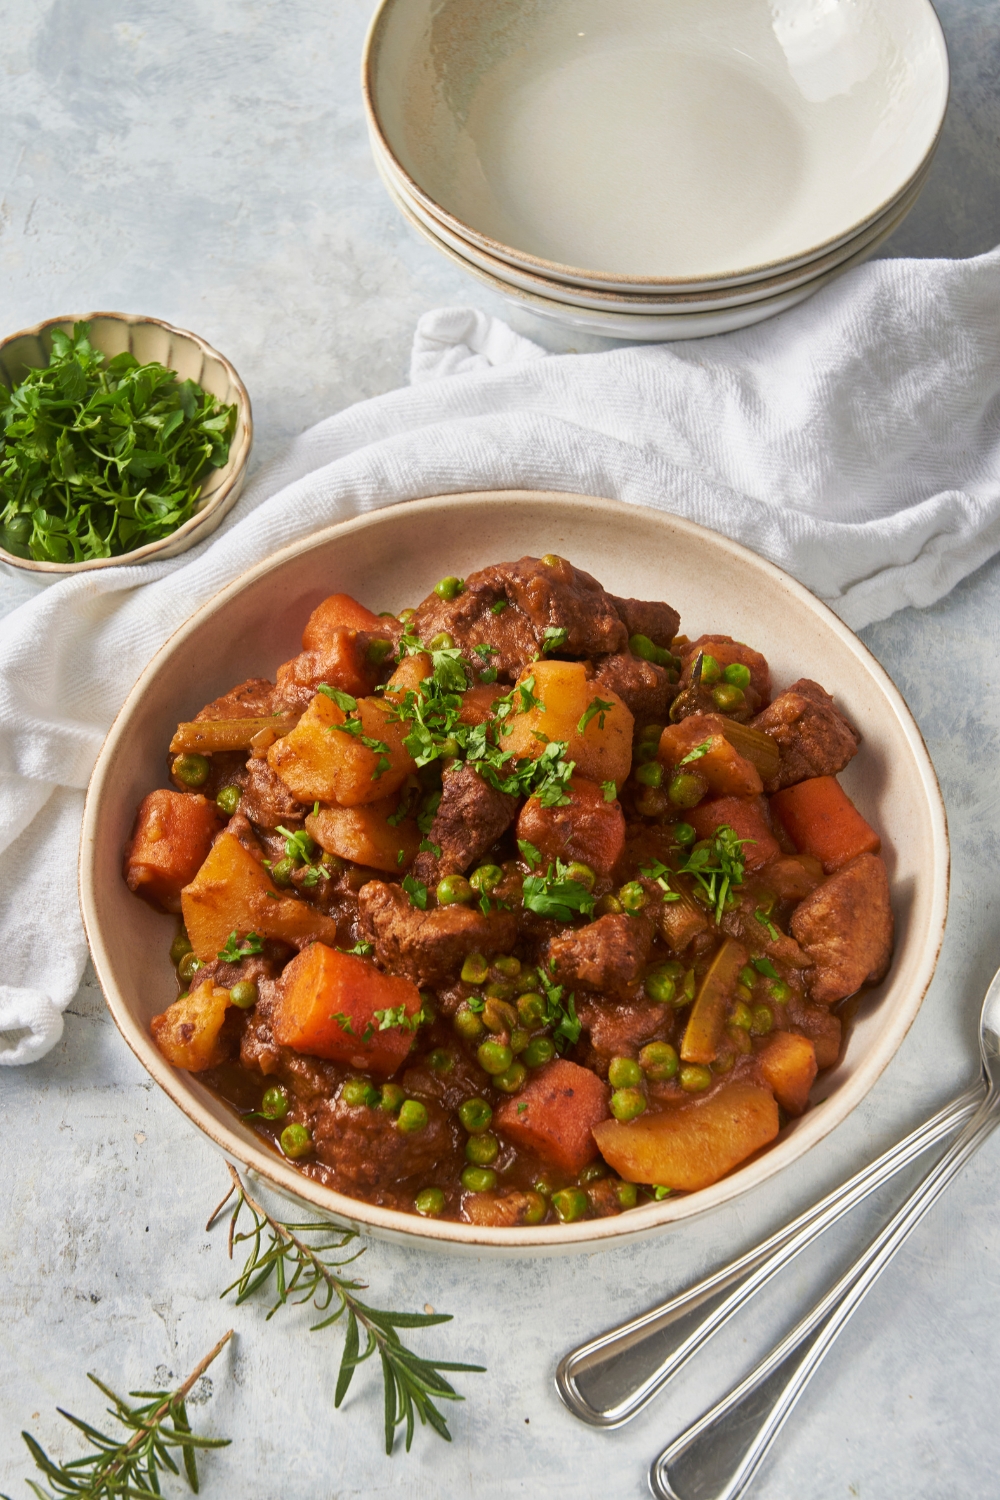 Carrots, potatoes, beef, and peas on a white plate.